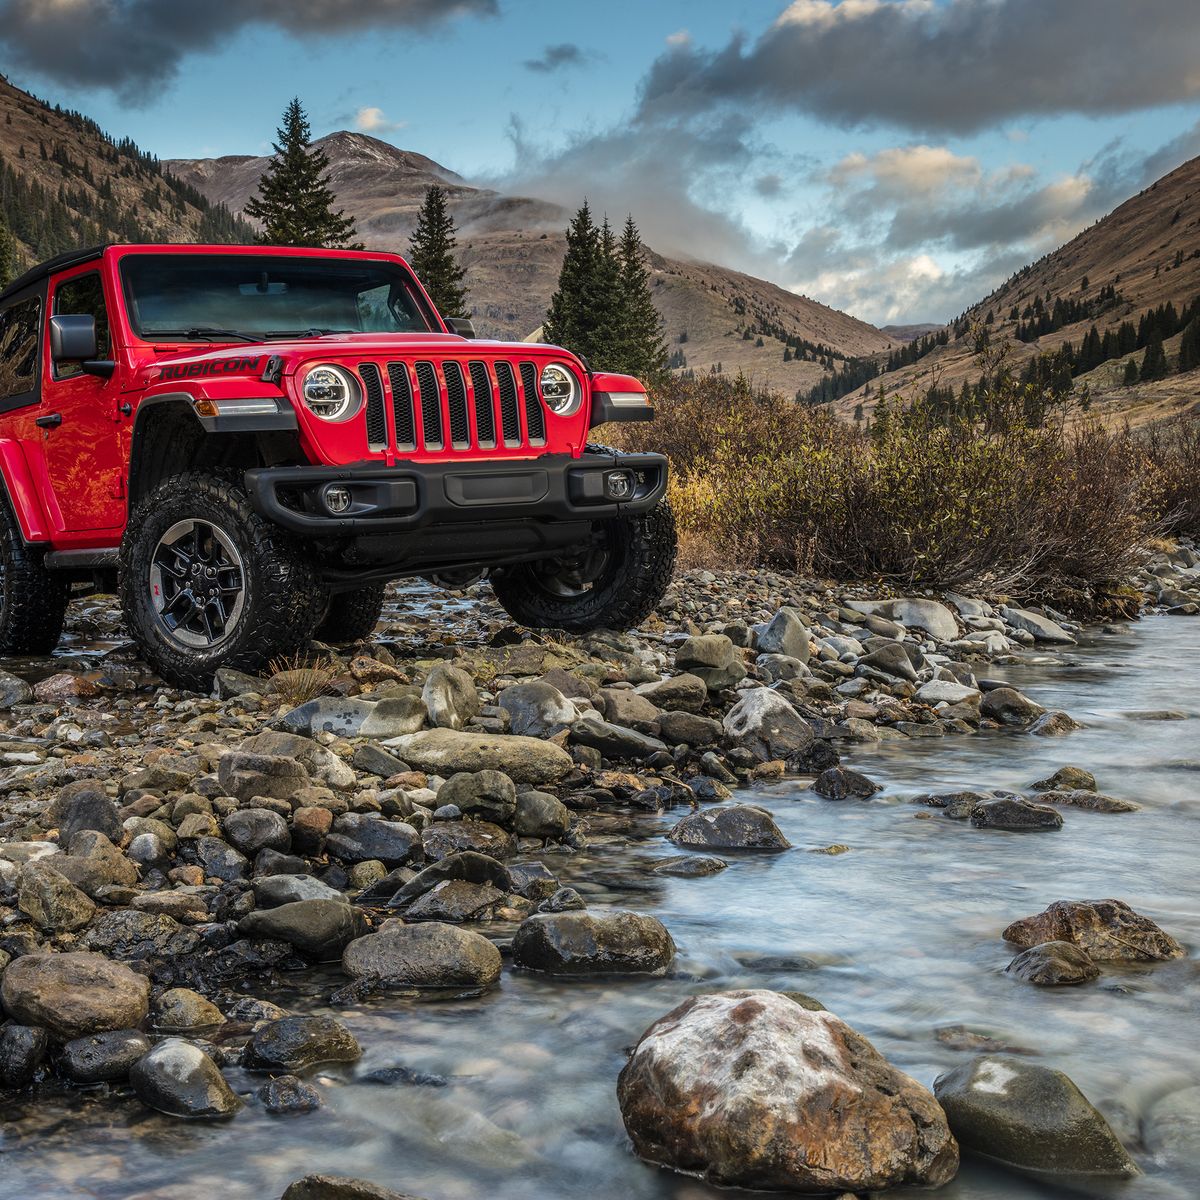 2018 Jeep Wrangler Review - Road Test & Price for the 2018 JL Rubicon, Sport  & Sahara